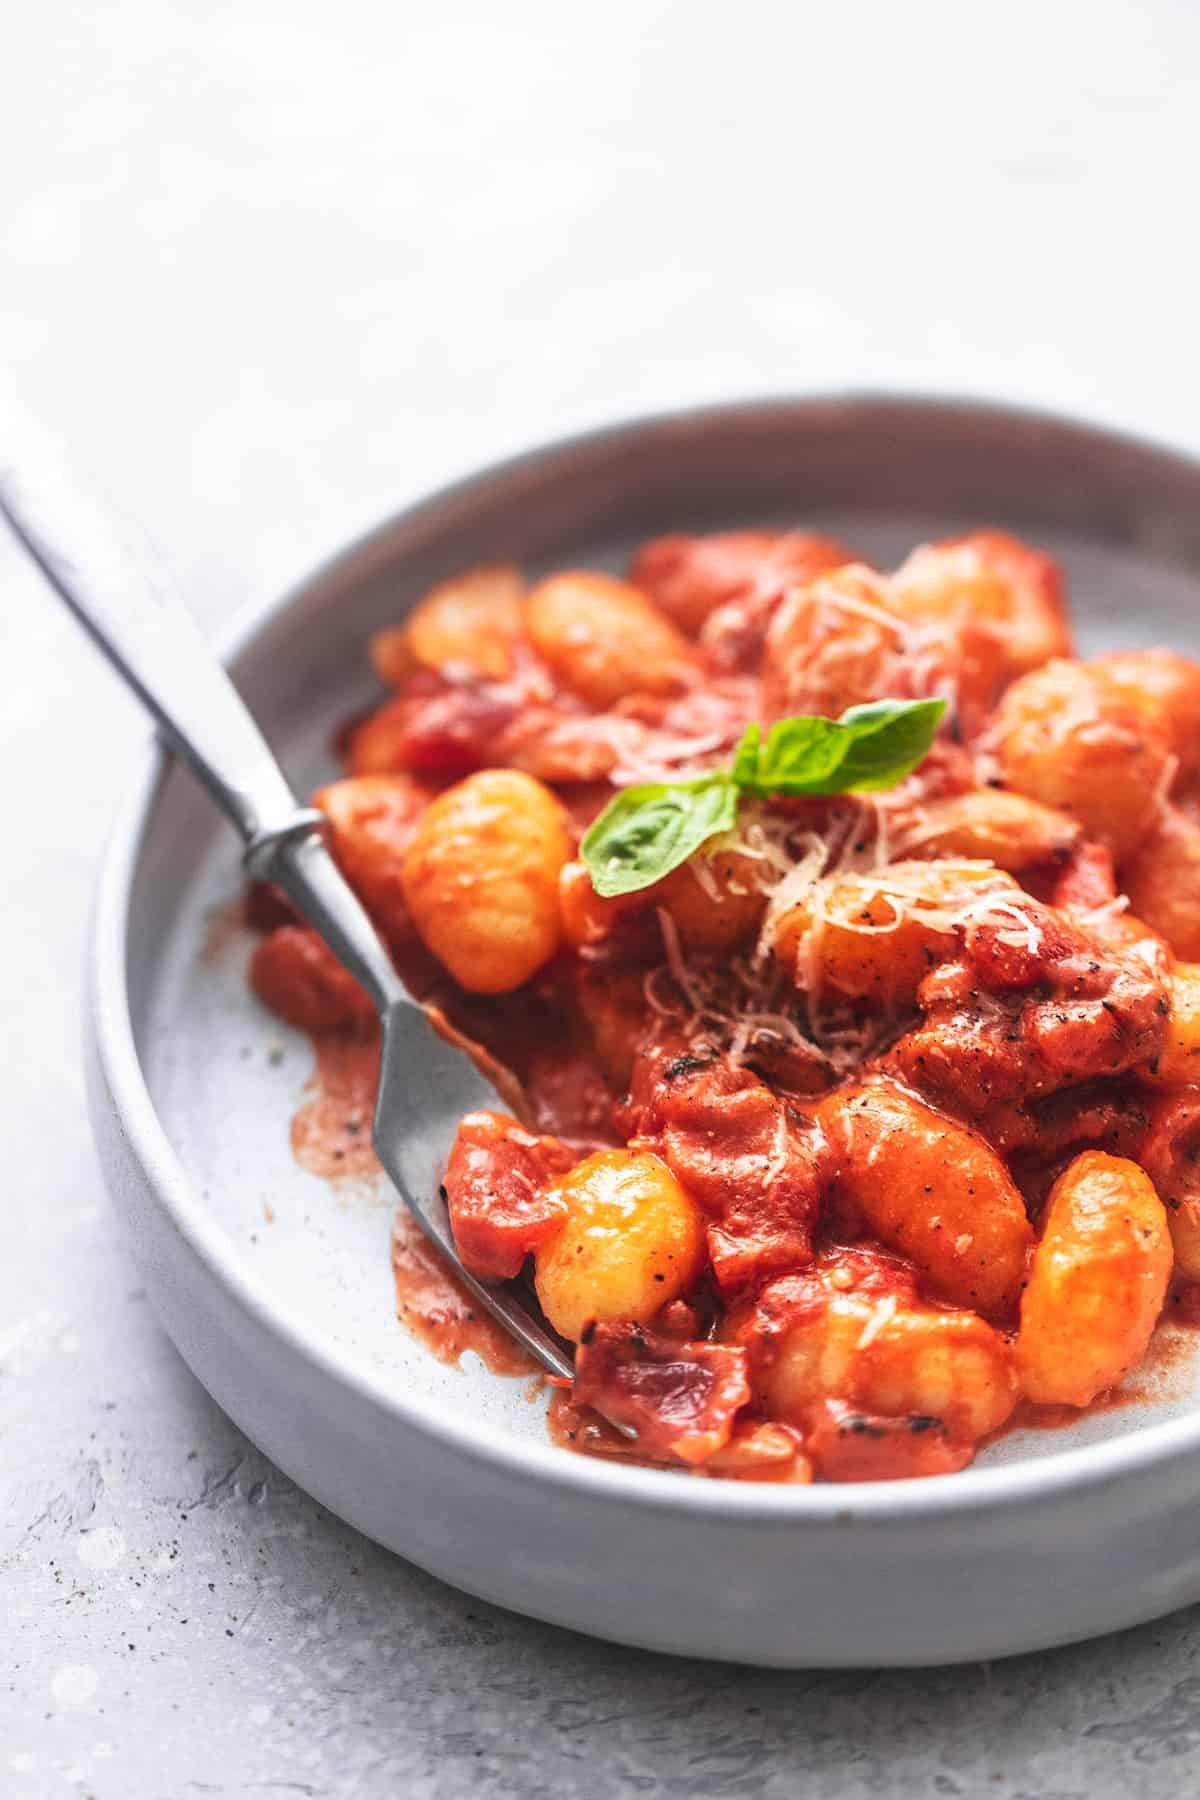 gnocchi with creamy tomato sauce on a gray plate with a fork